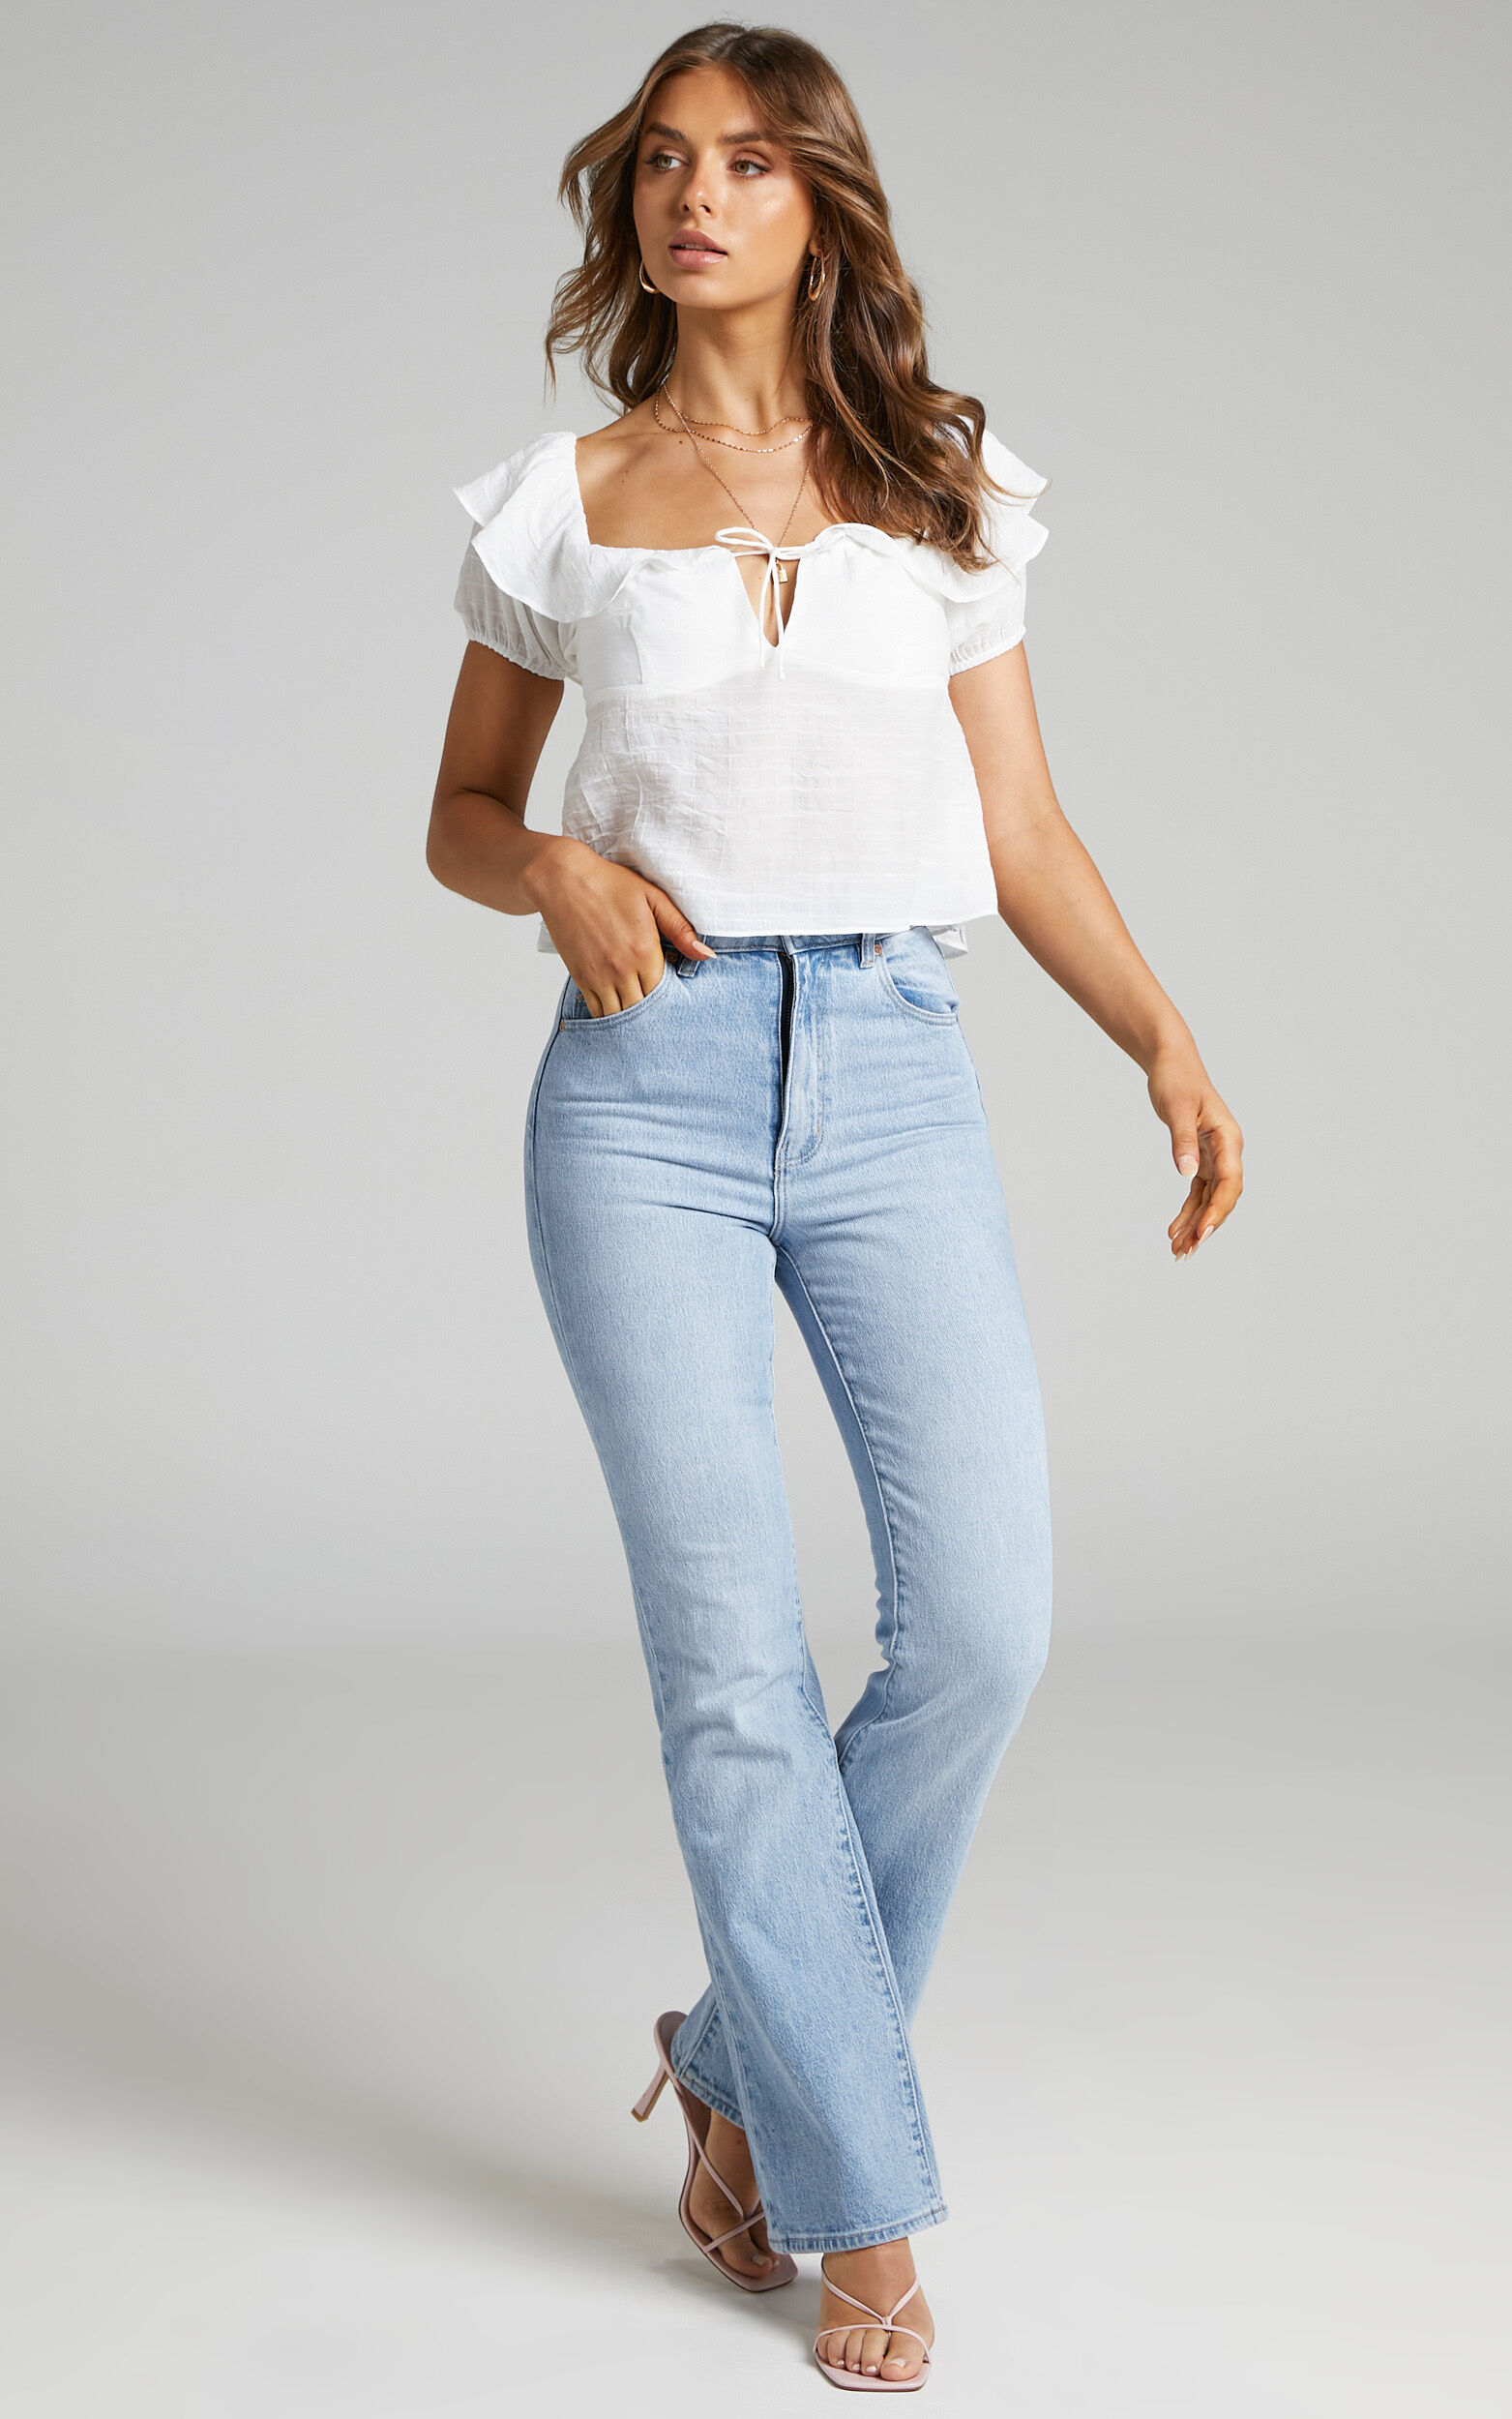 Canthe Frill Detail Puff Sleeve Off Shoulder Top in White - 04, WHT1, super-hi-res image number null